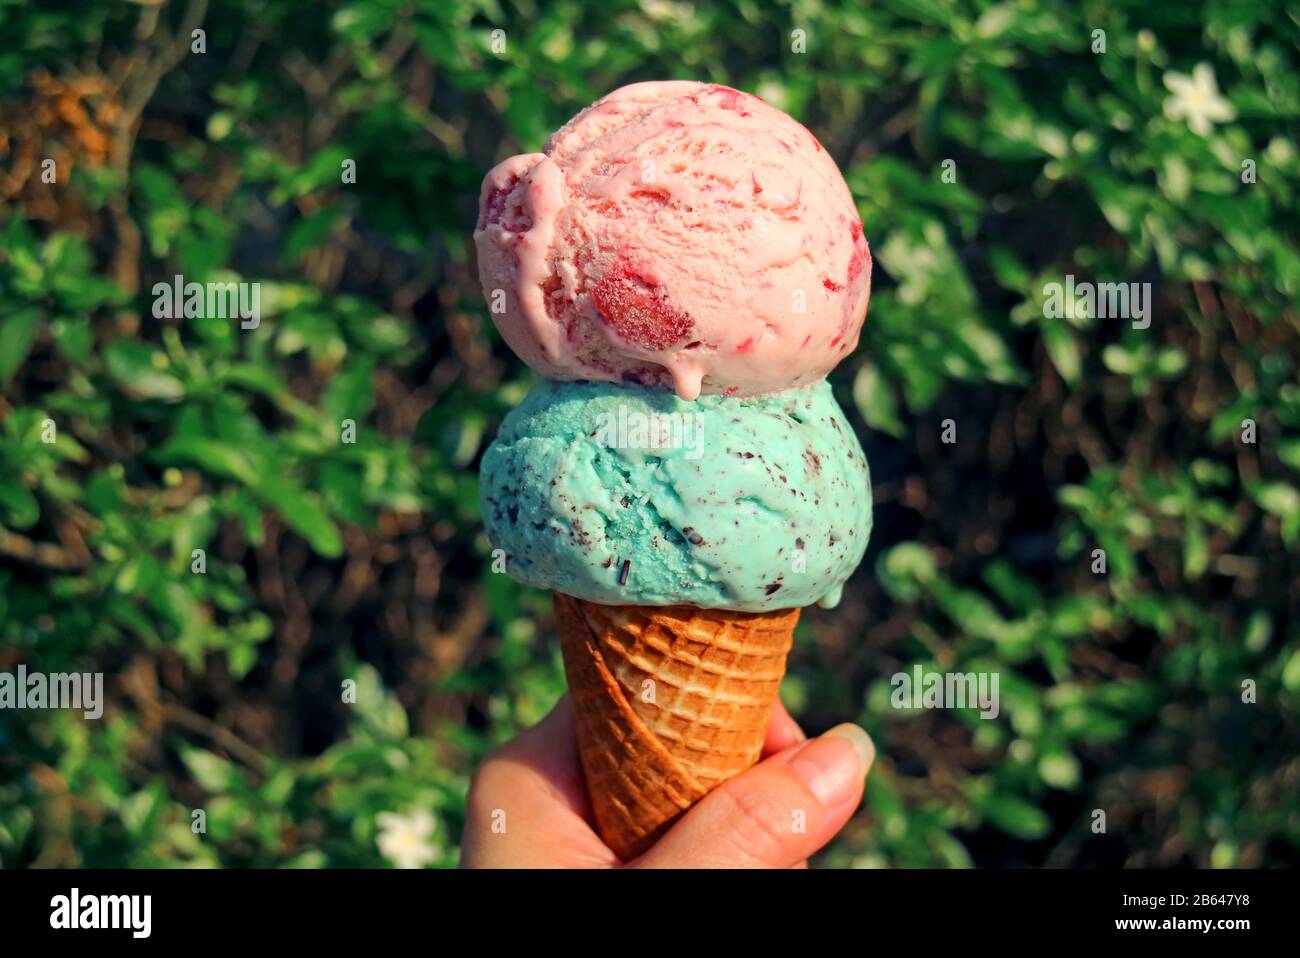 Hand holding two scoops of ice cream cone melting in the sunlight Stock Photo